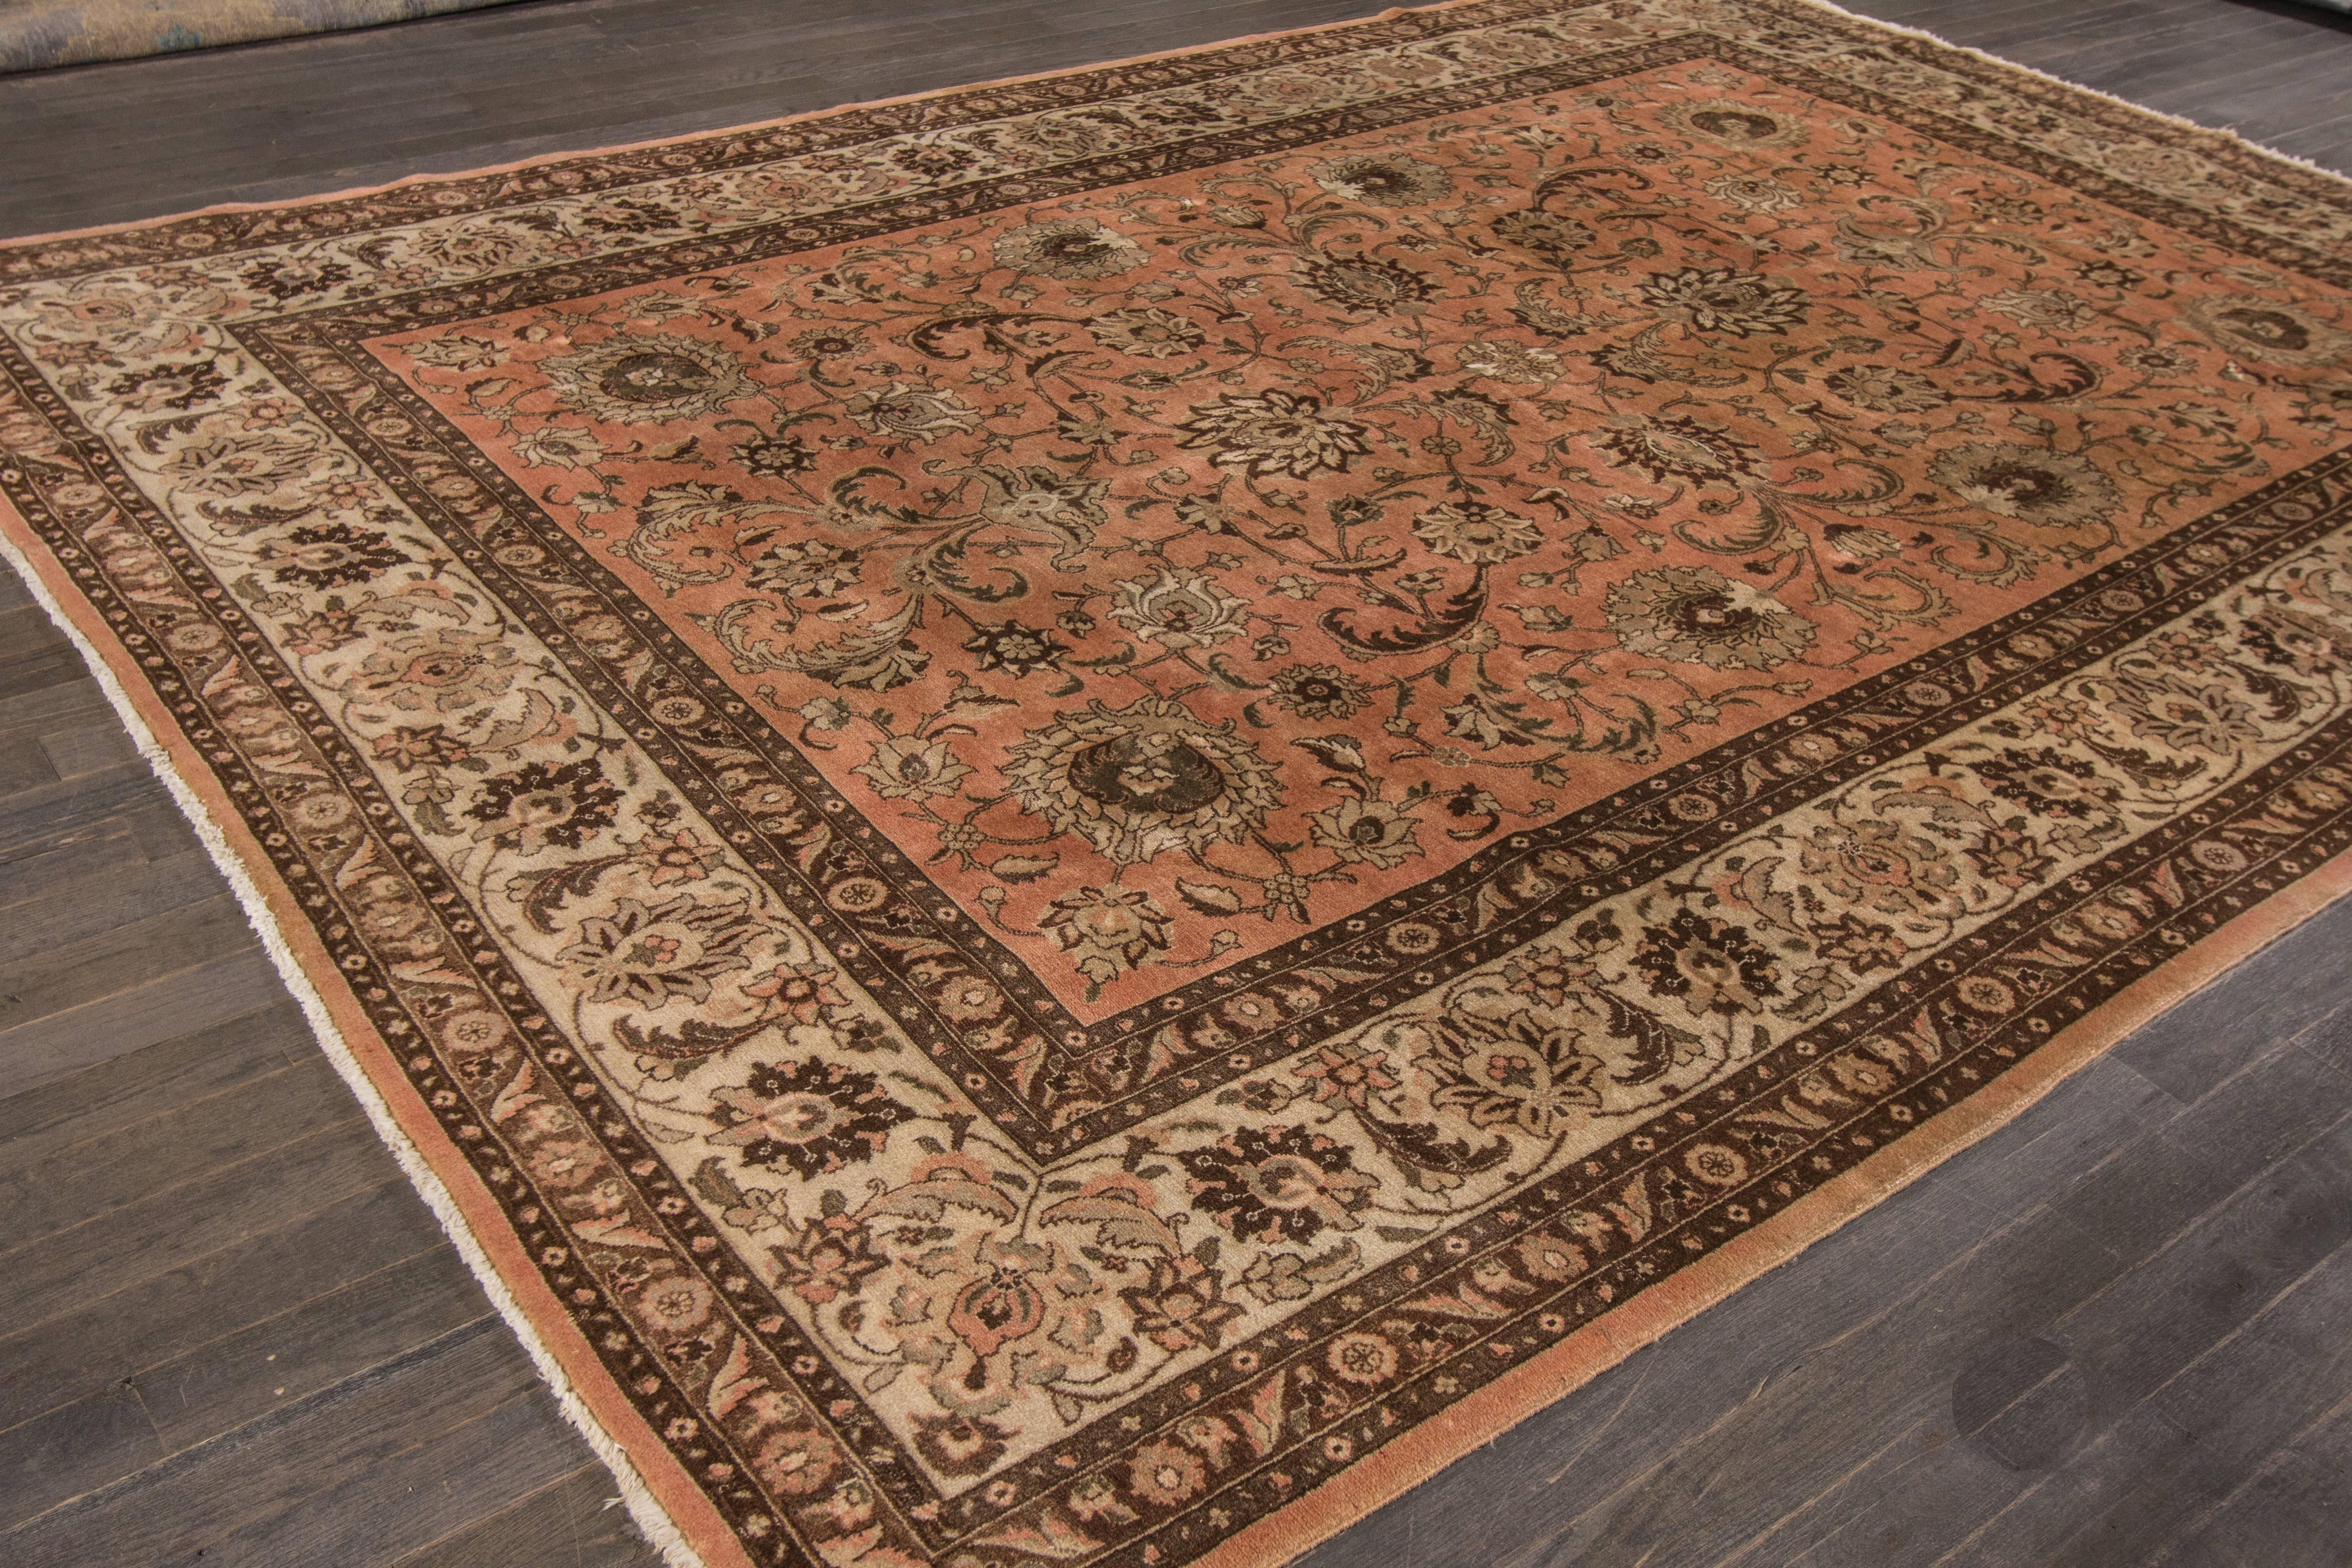 Lovely Nice Vintage Tabriz Rug In Good Condition For Sale In Norwalk, CT